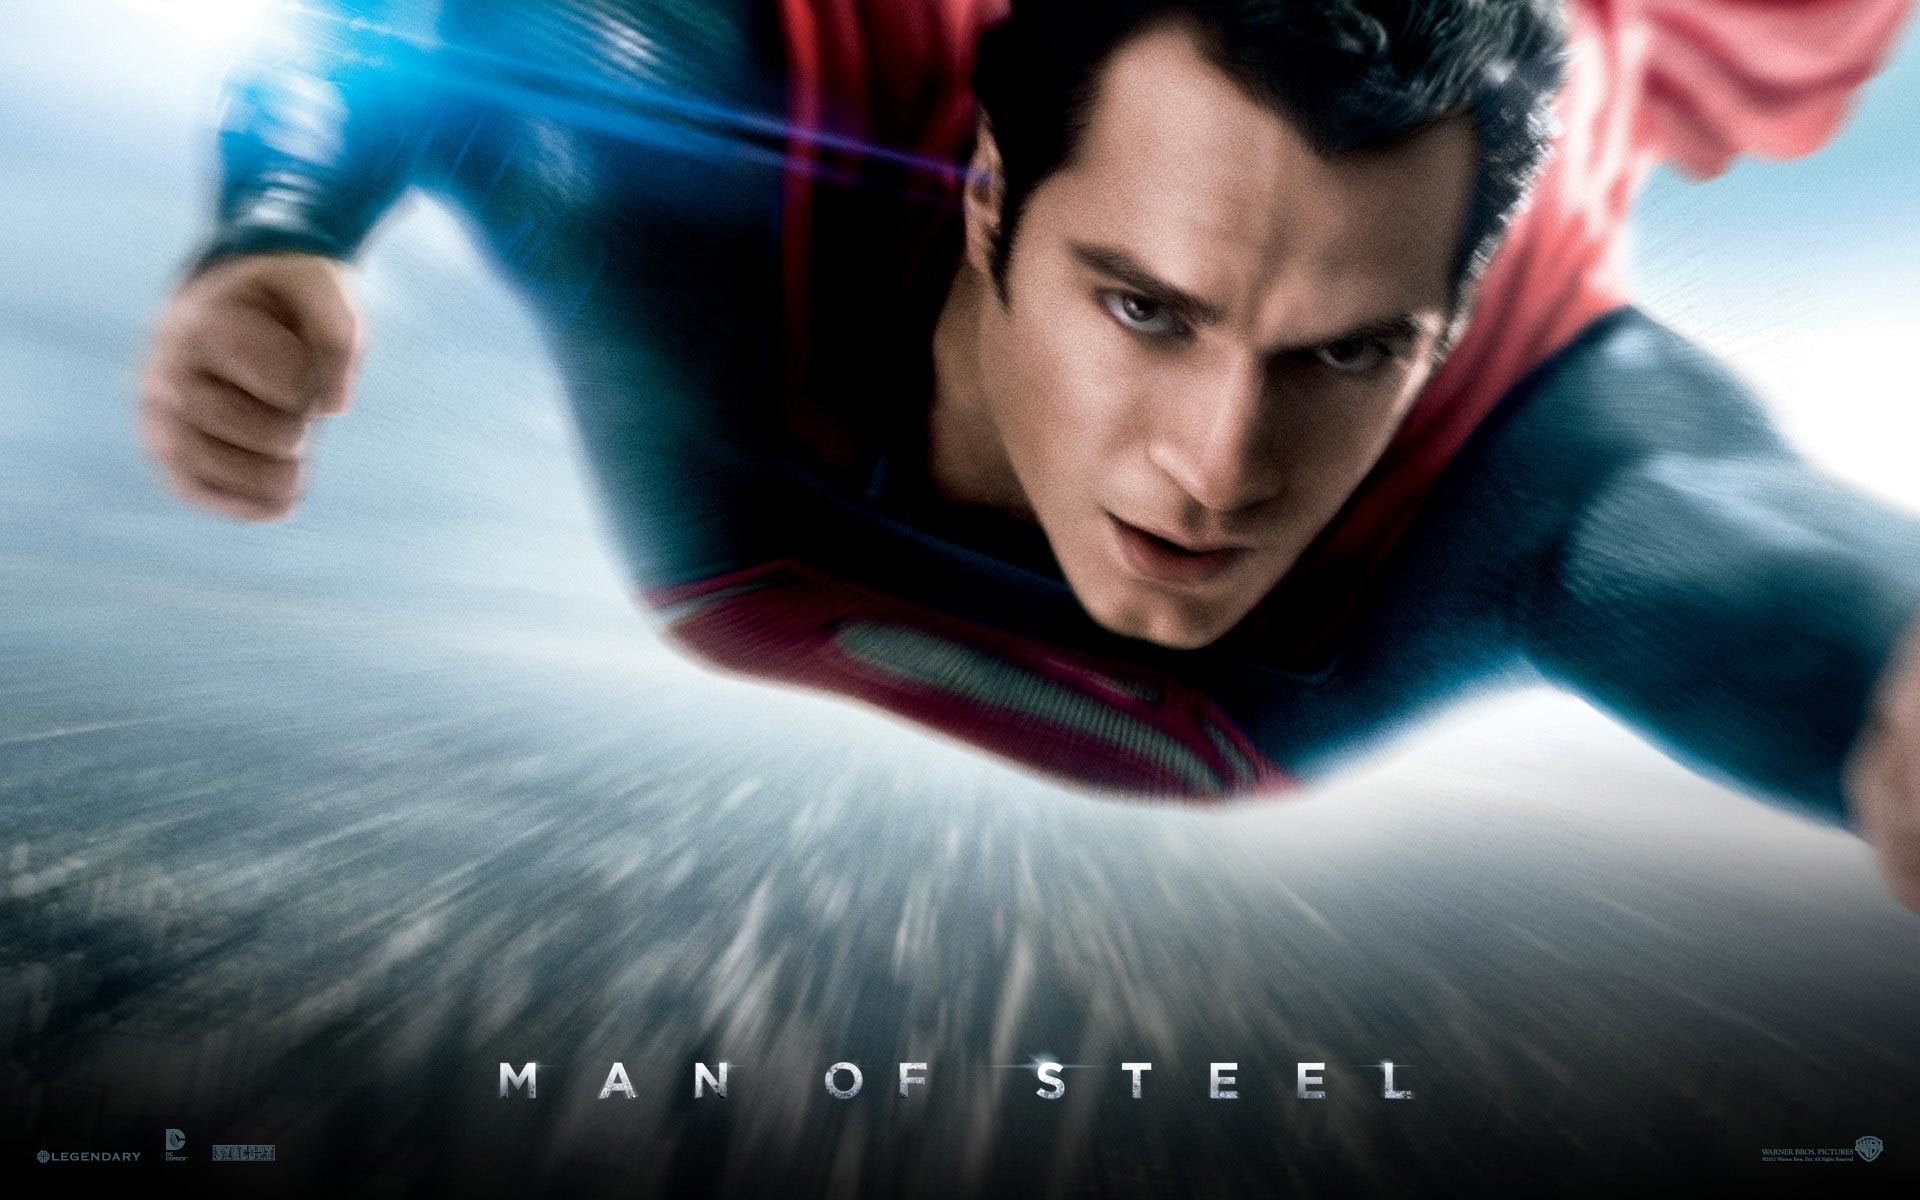 1920x1200 Whoopi Goldberg Says “Man of Steel” Producers Should Not Have Targeted  Christians based on the Similarities of Superman and Jesus Christ